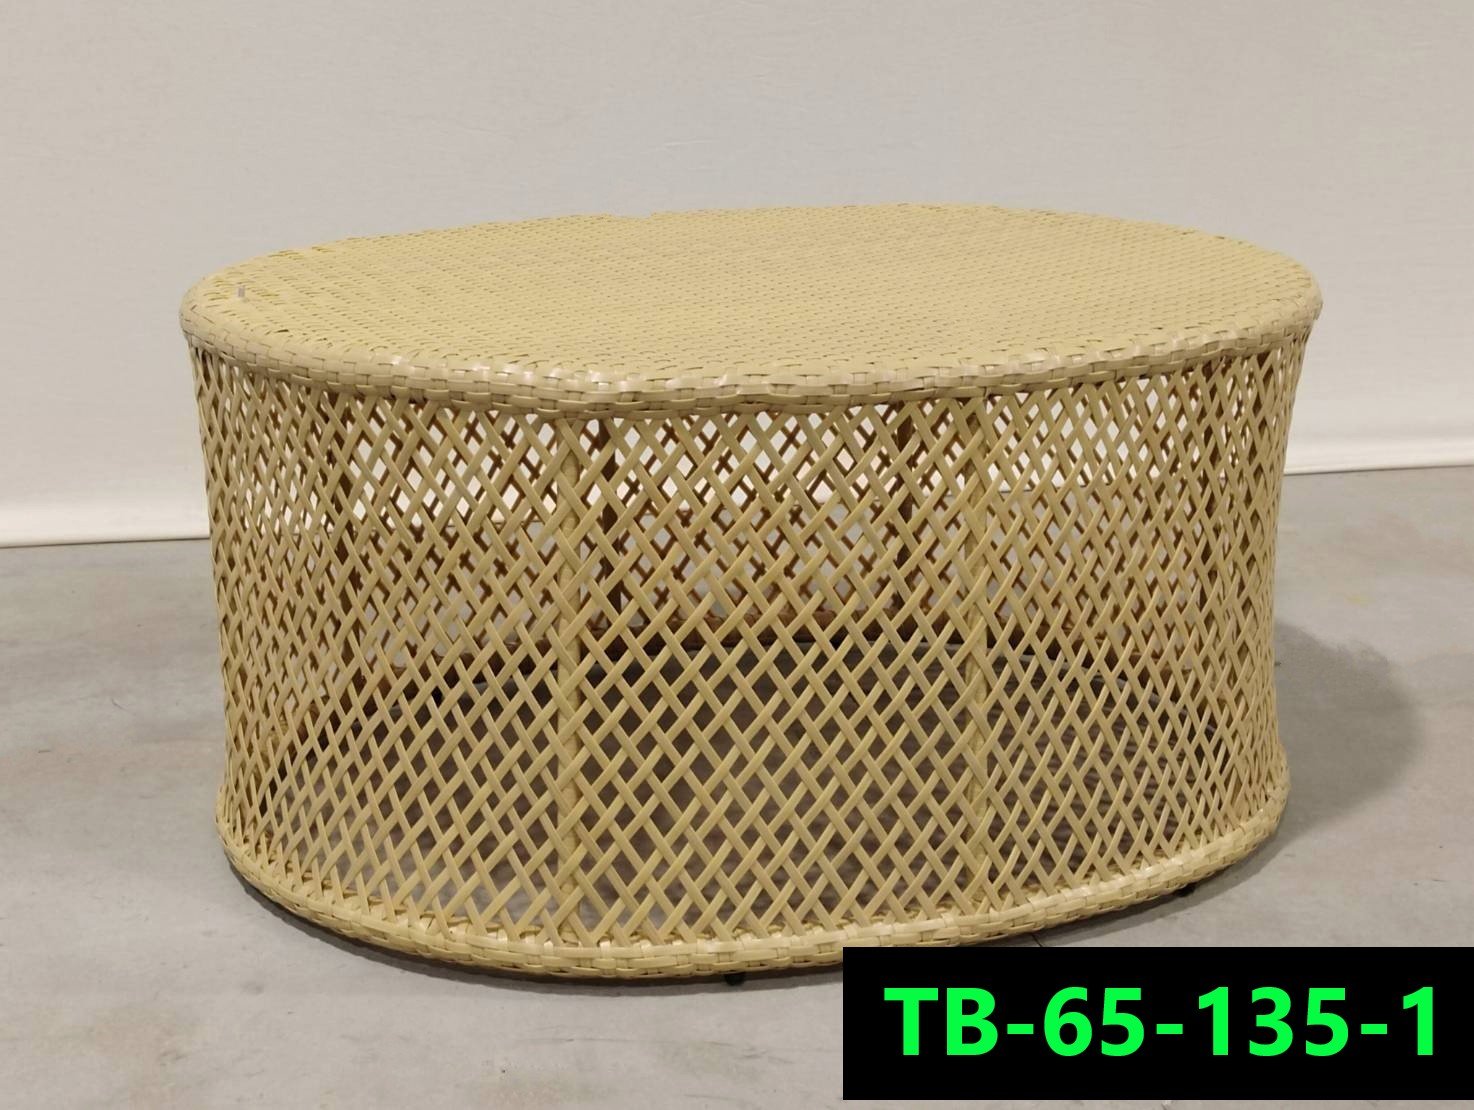 Rattan Table Product code TB-65-135-1